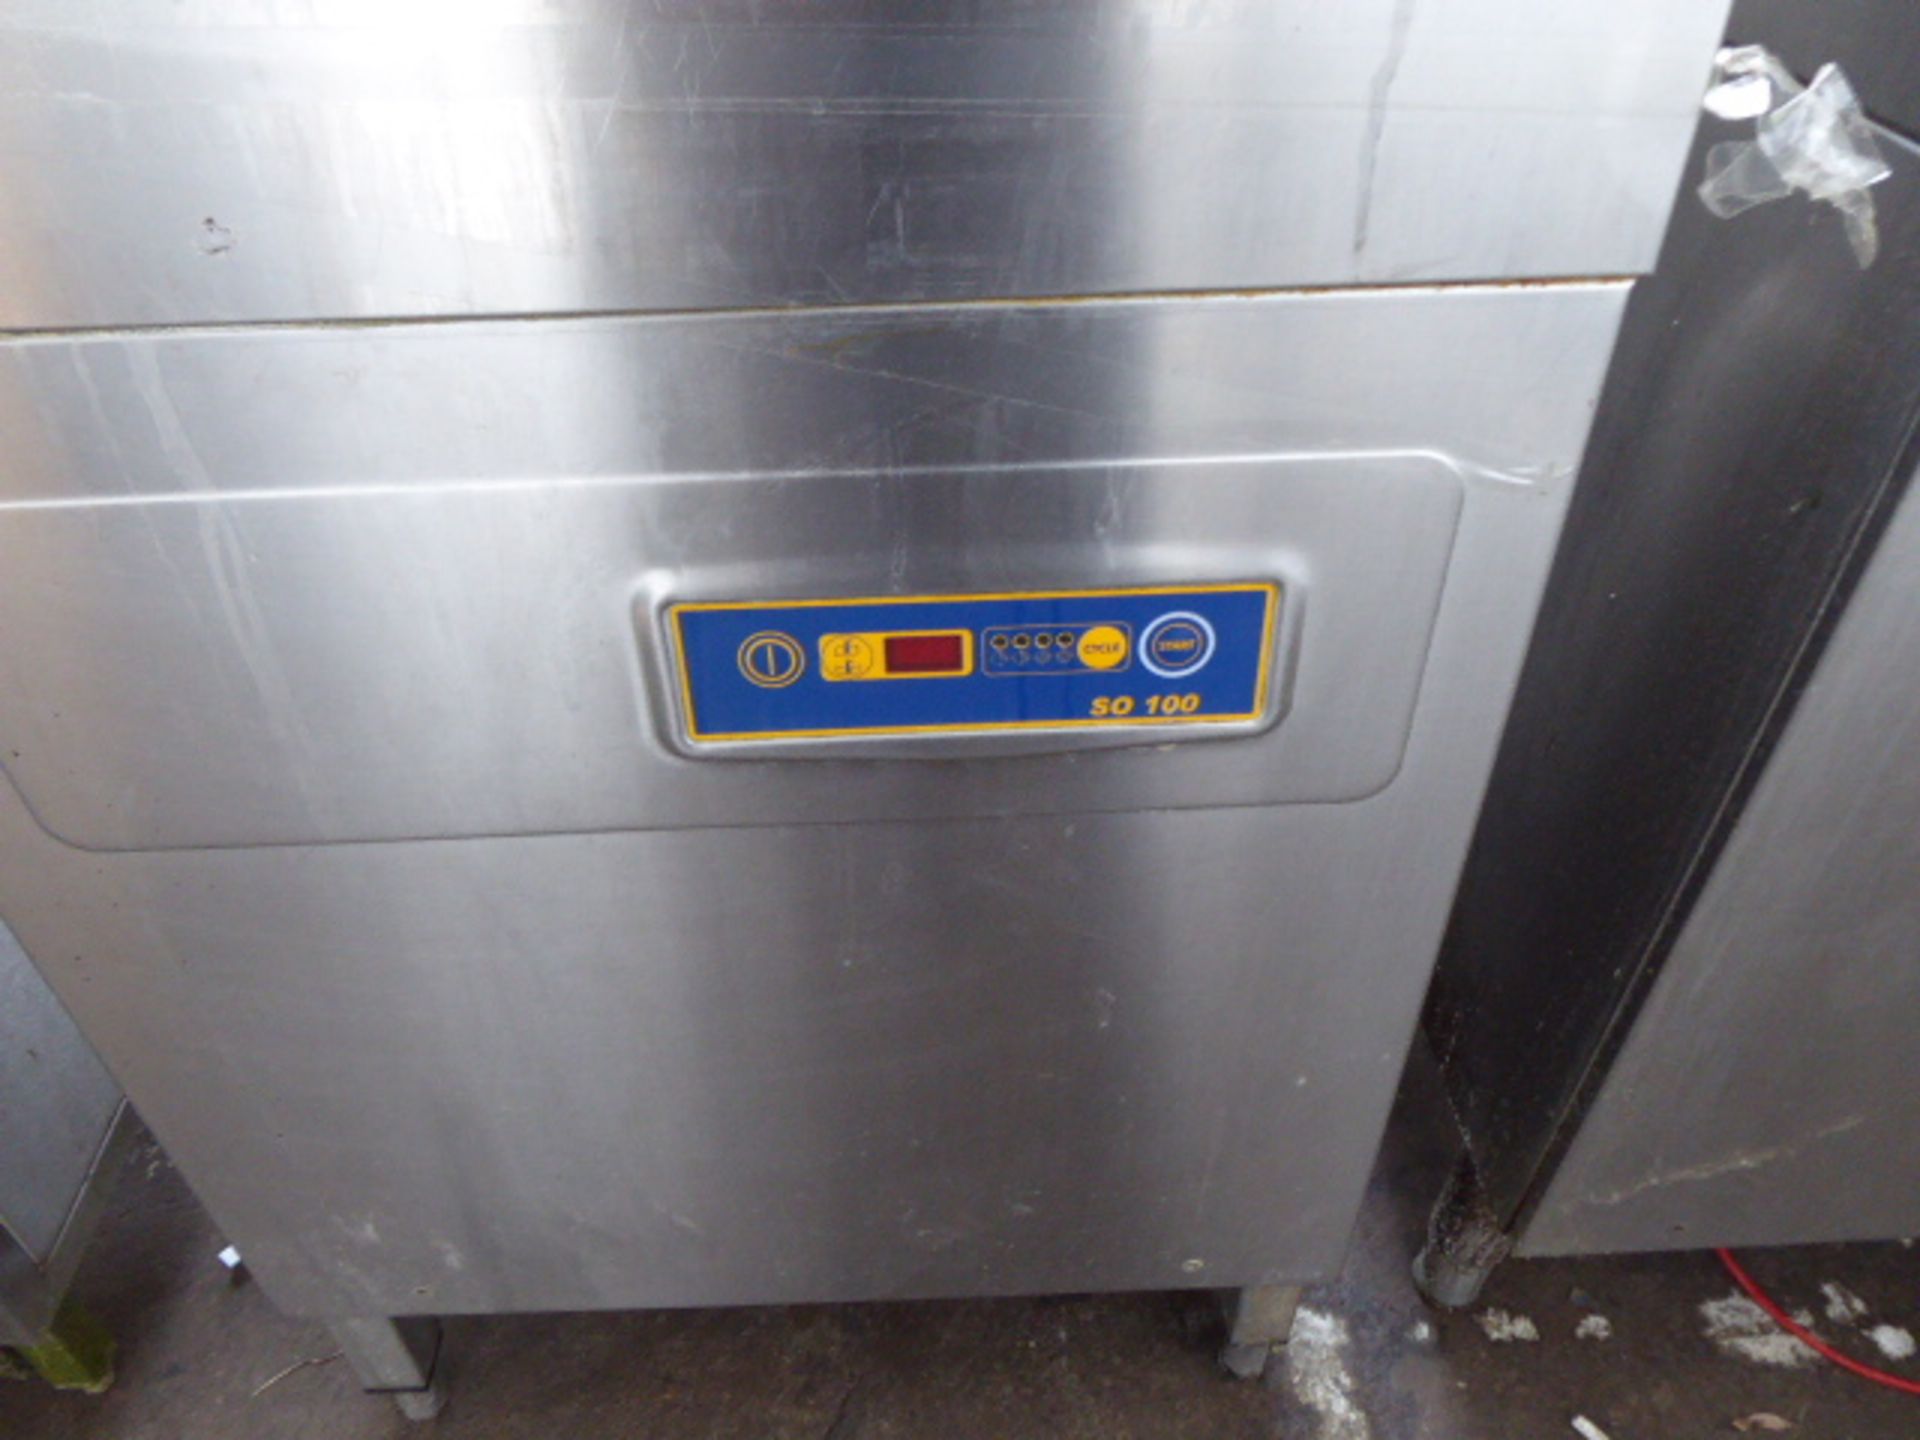 60cm Hoonved model SO100 lift top pass through dishwasher - Image 3 of 3